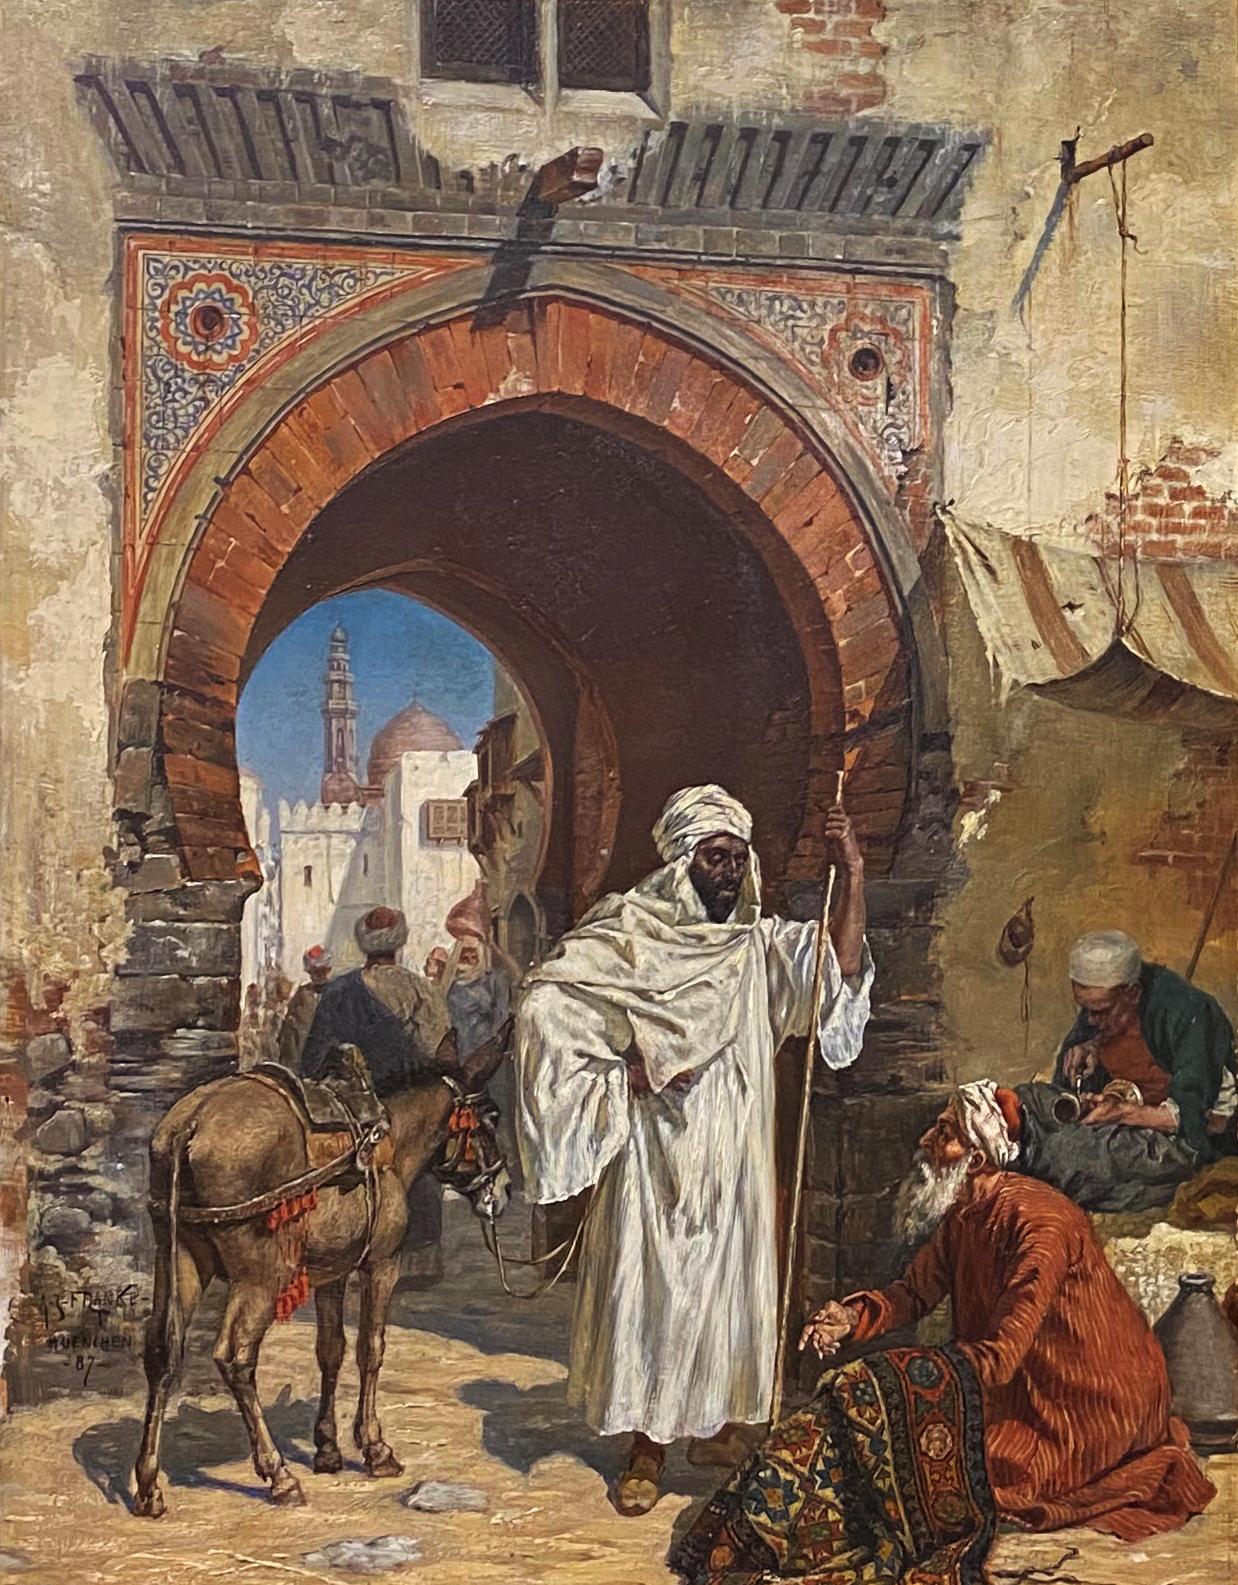 An Oriental Rug Merchant in a Busy Marketplace - Painting by Albert Joseph Franke